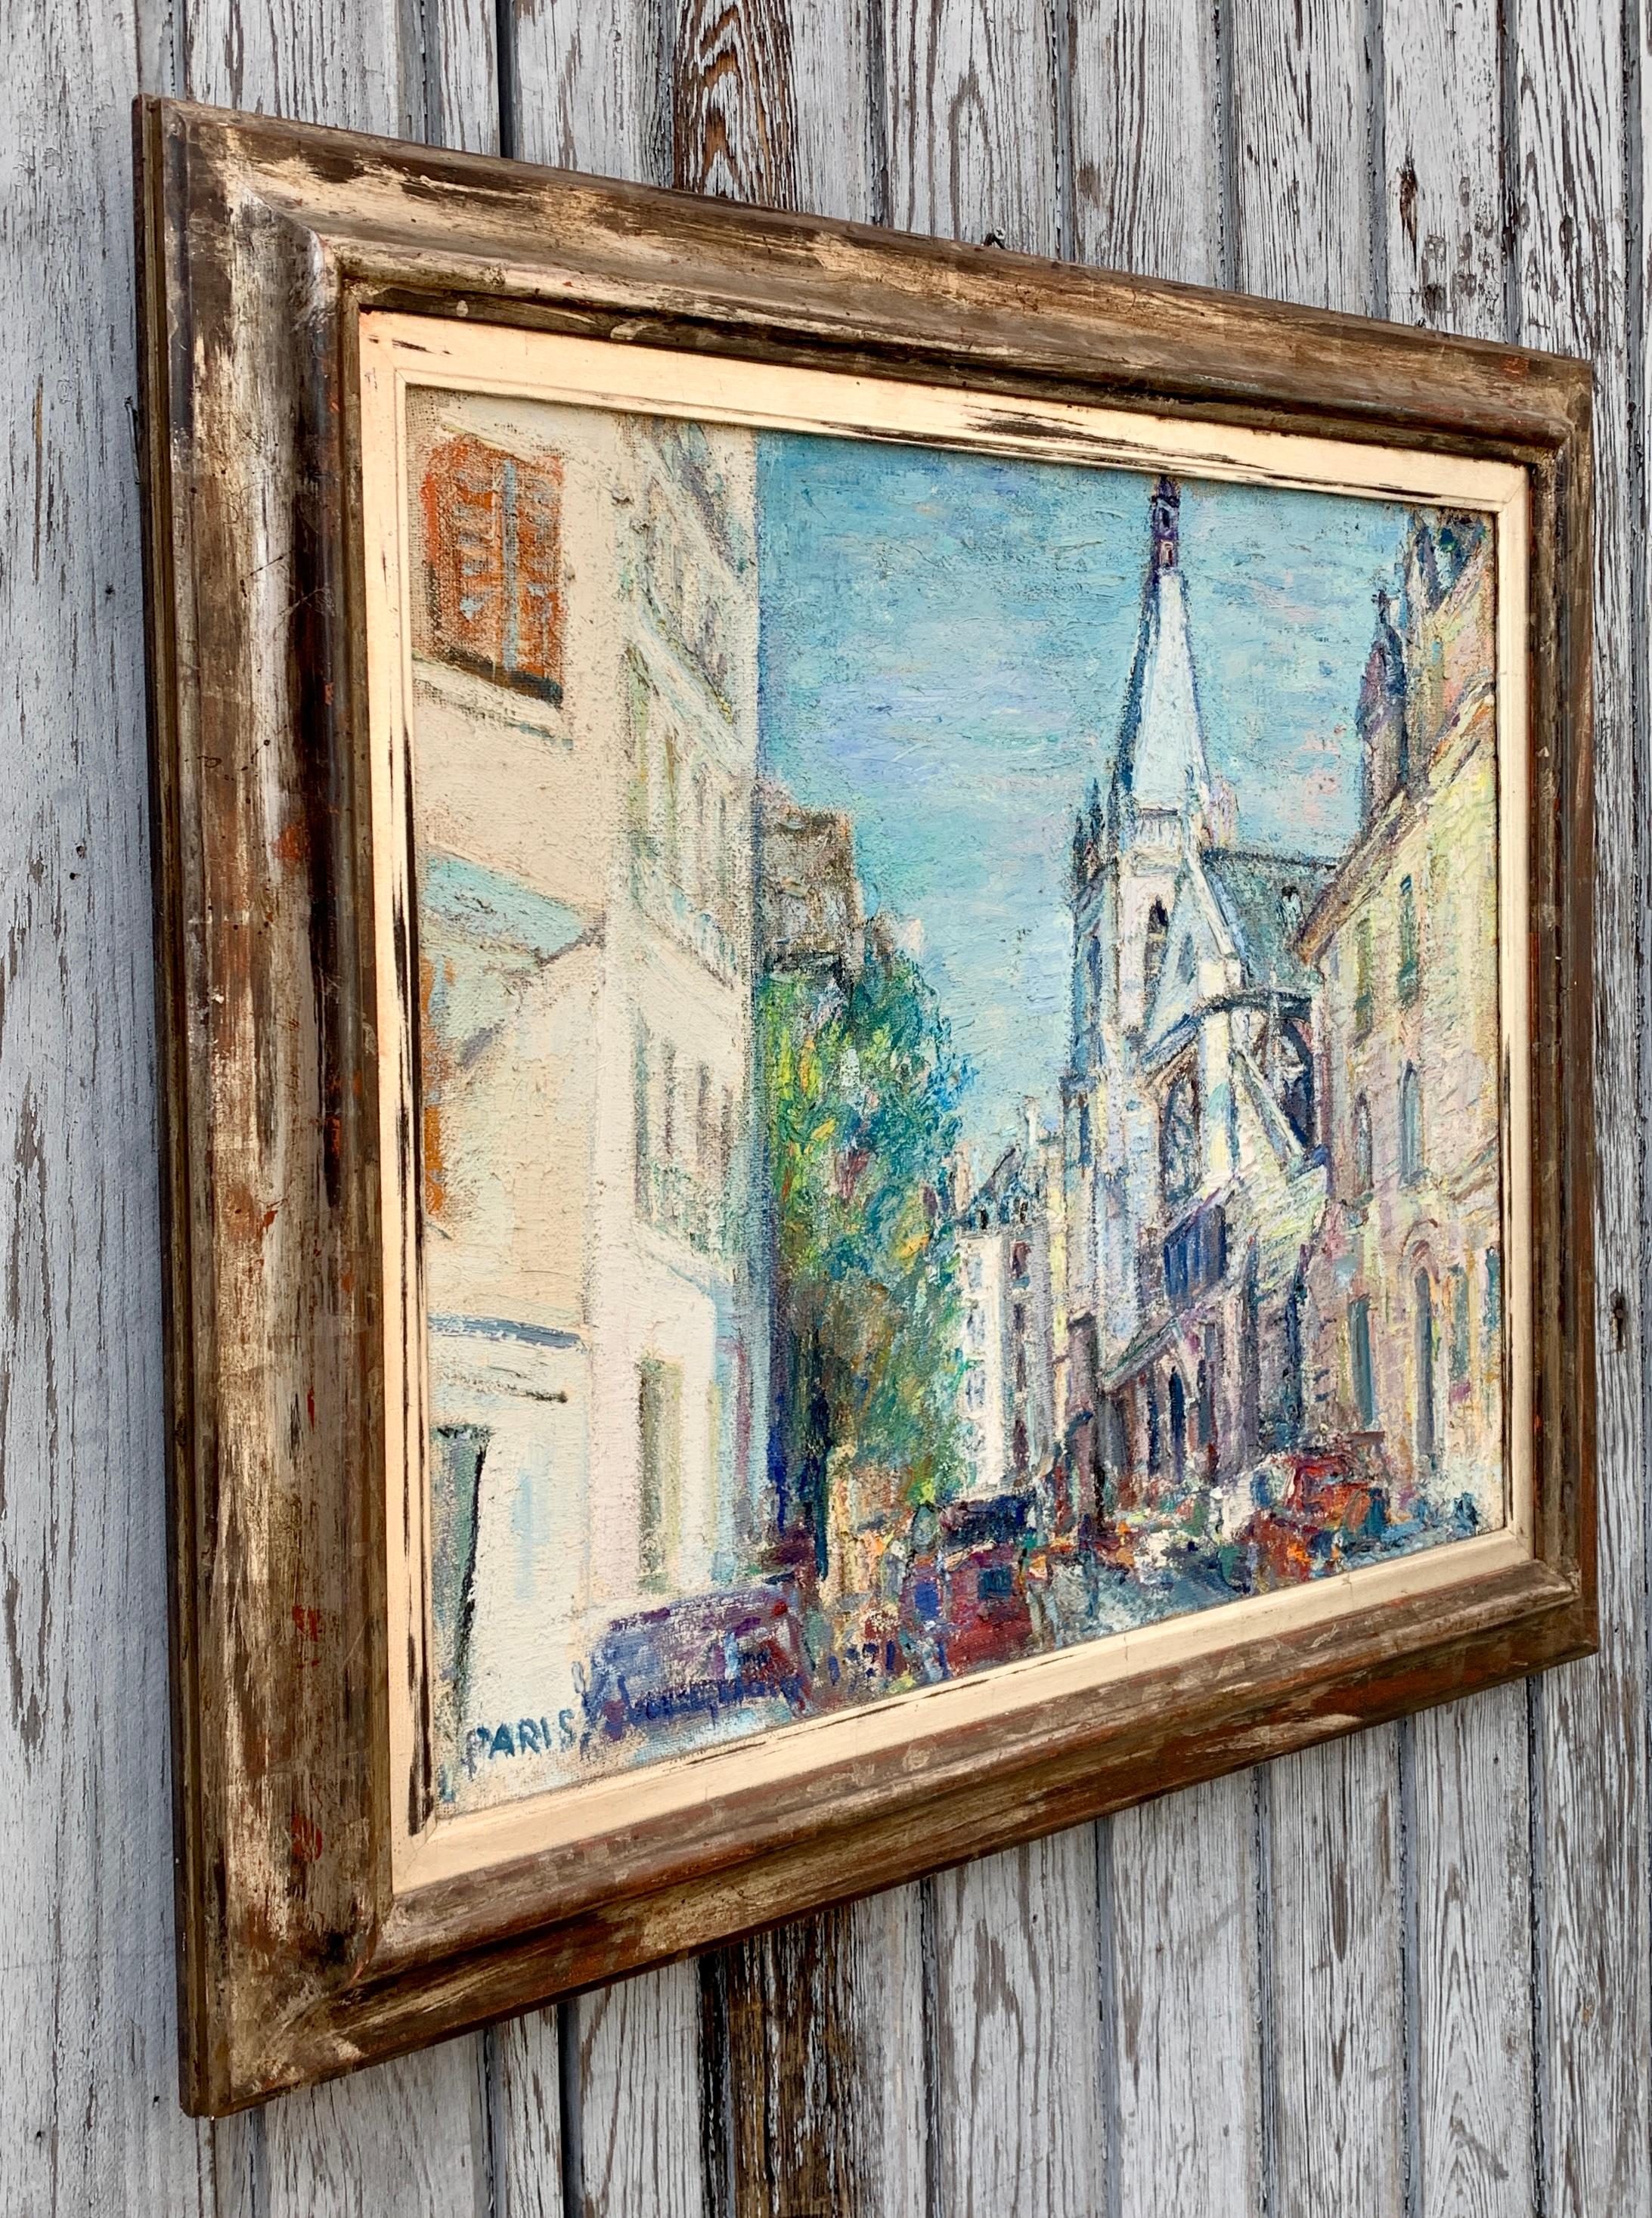 Hand-Painted Colorful 20th Century Oil Painting of Paris by Italian Artist Piero Solavaggione For Sale